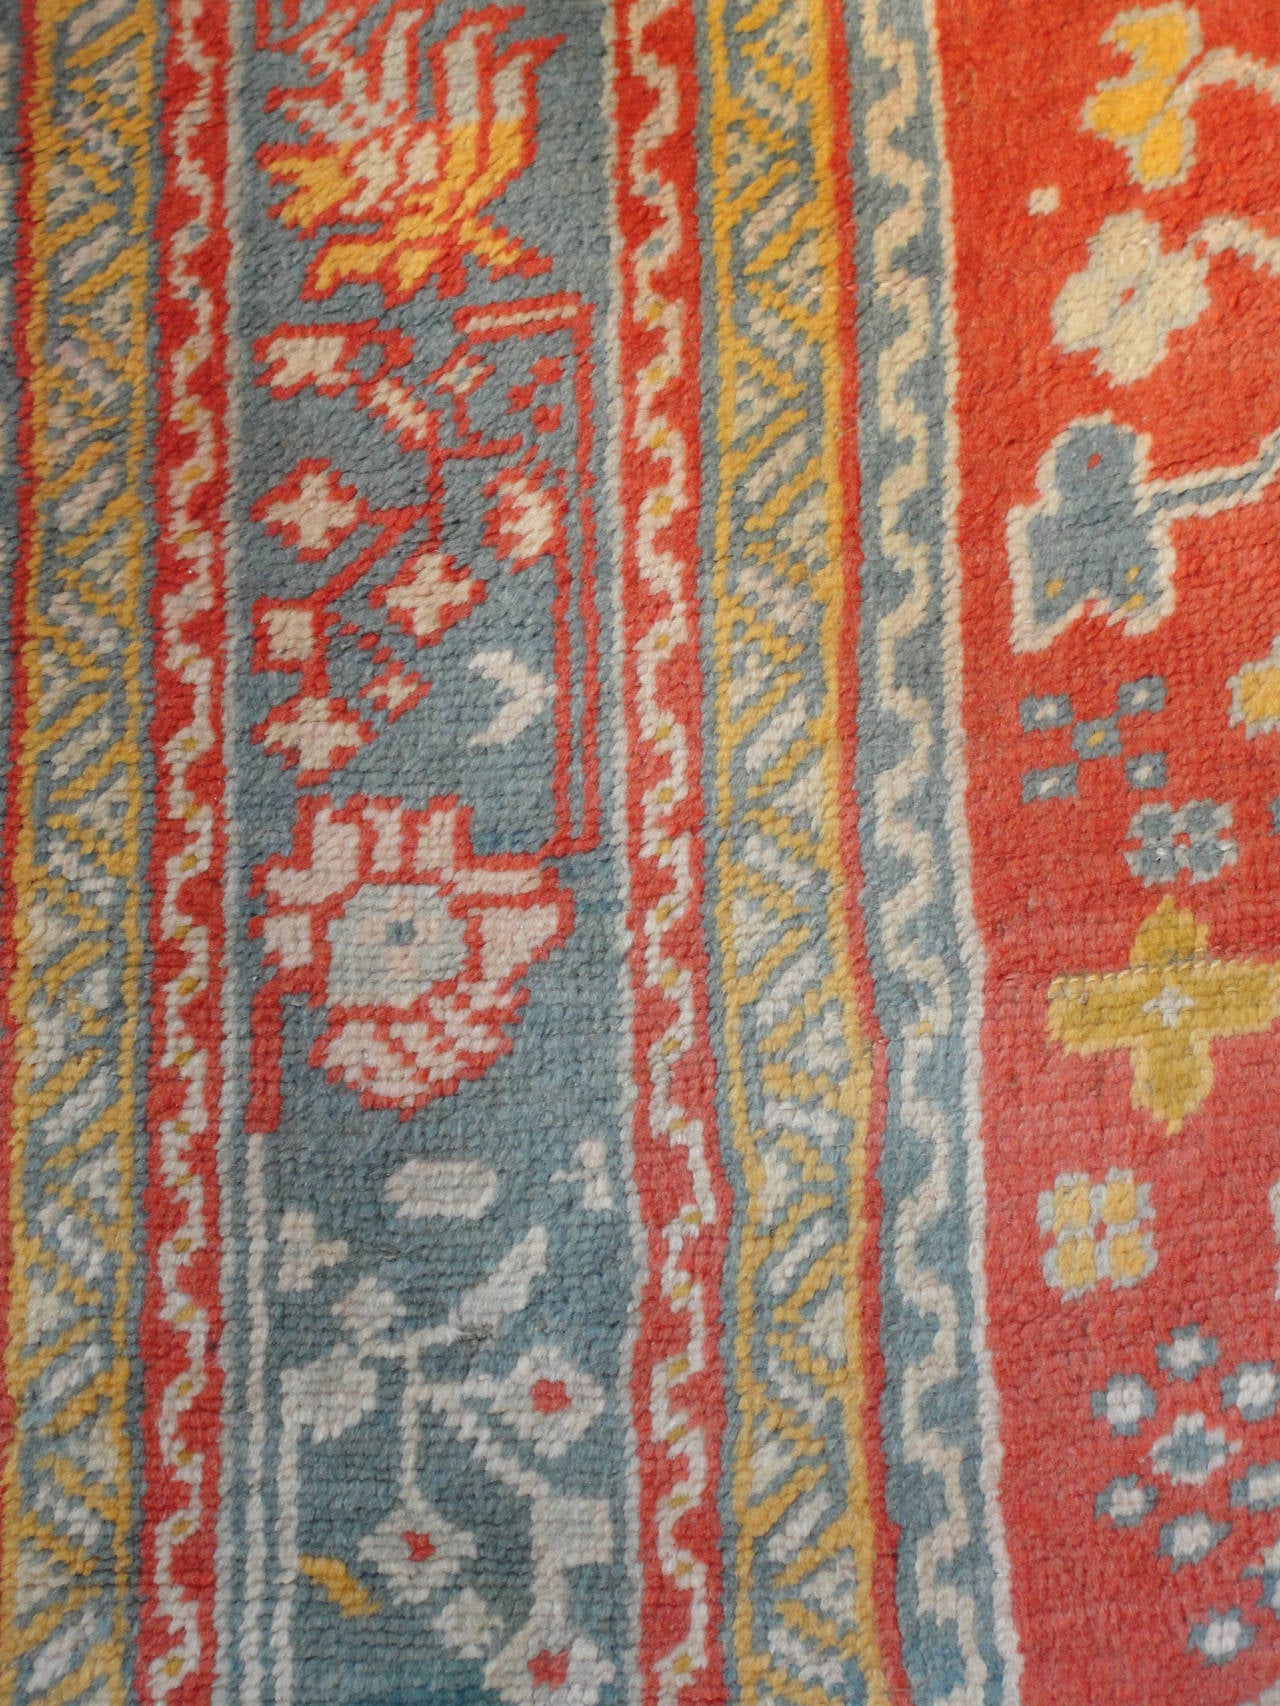 Antique Turkish Oushak Carpet, 10' x 14' In Good Condition For Sale In Evanston, IL